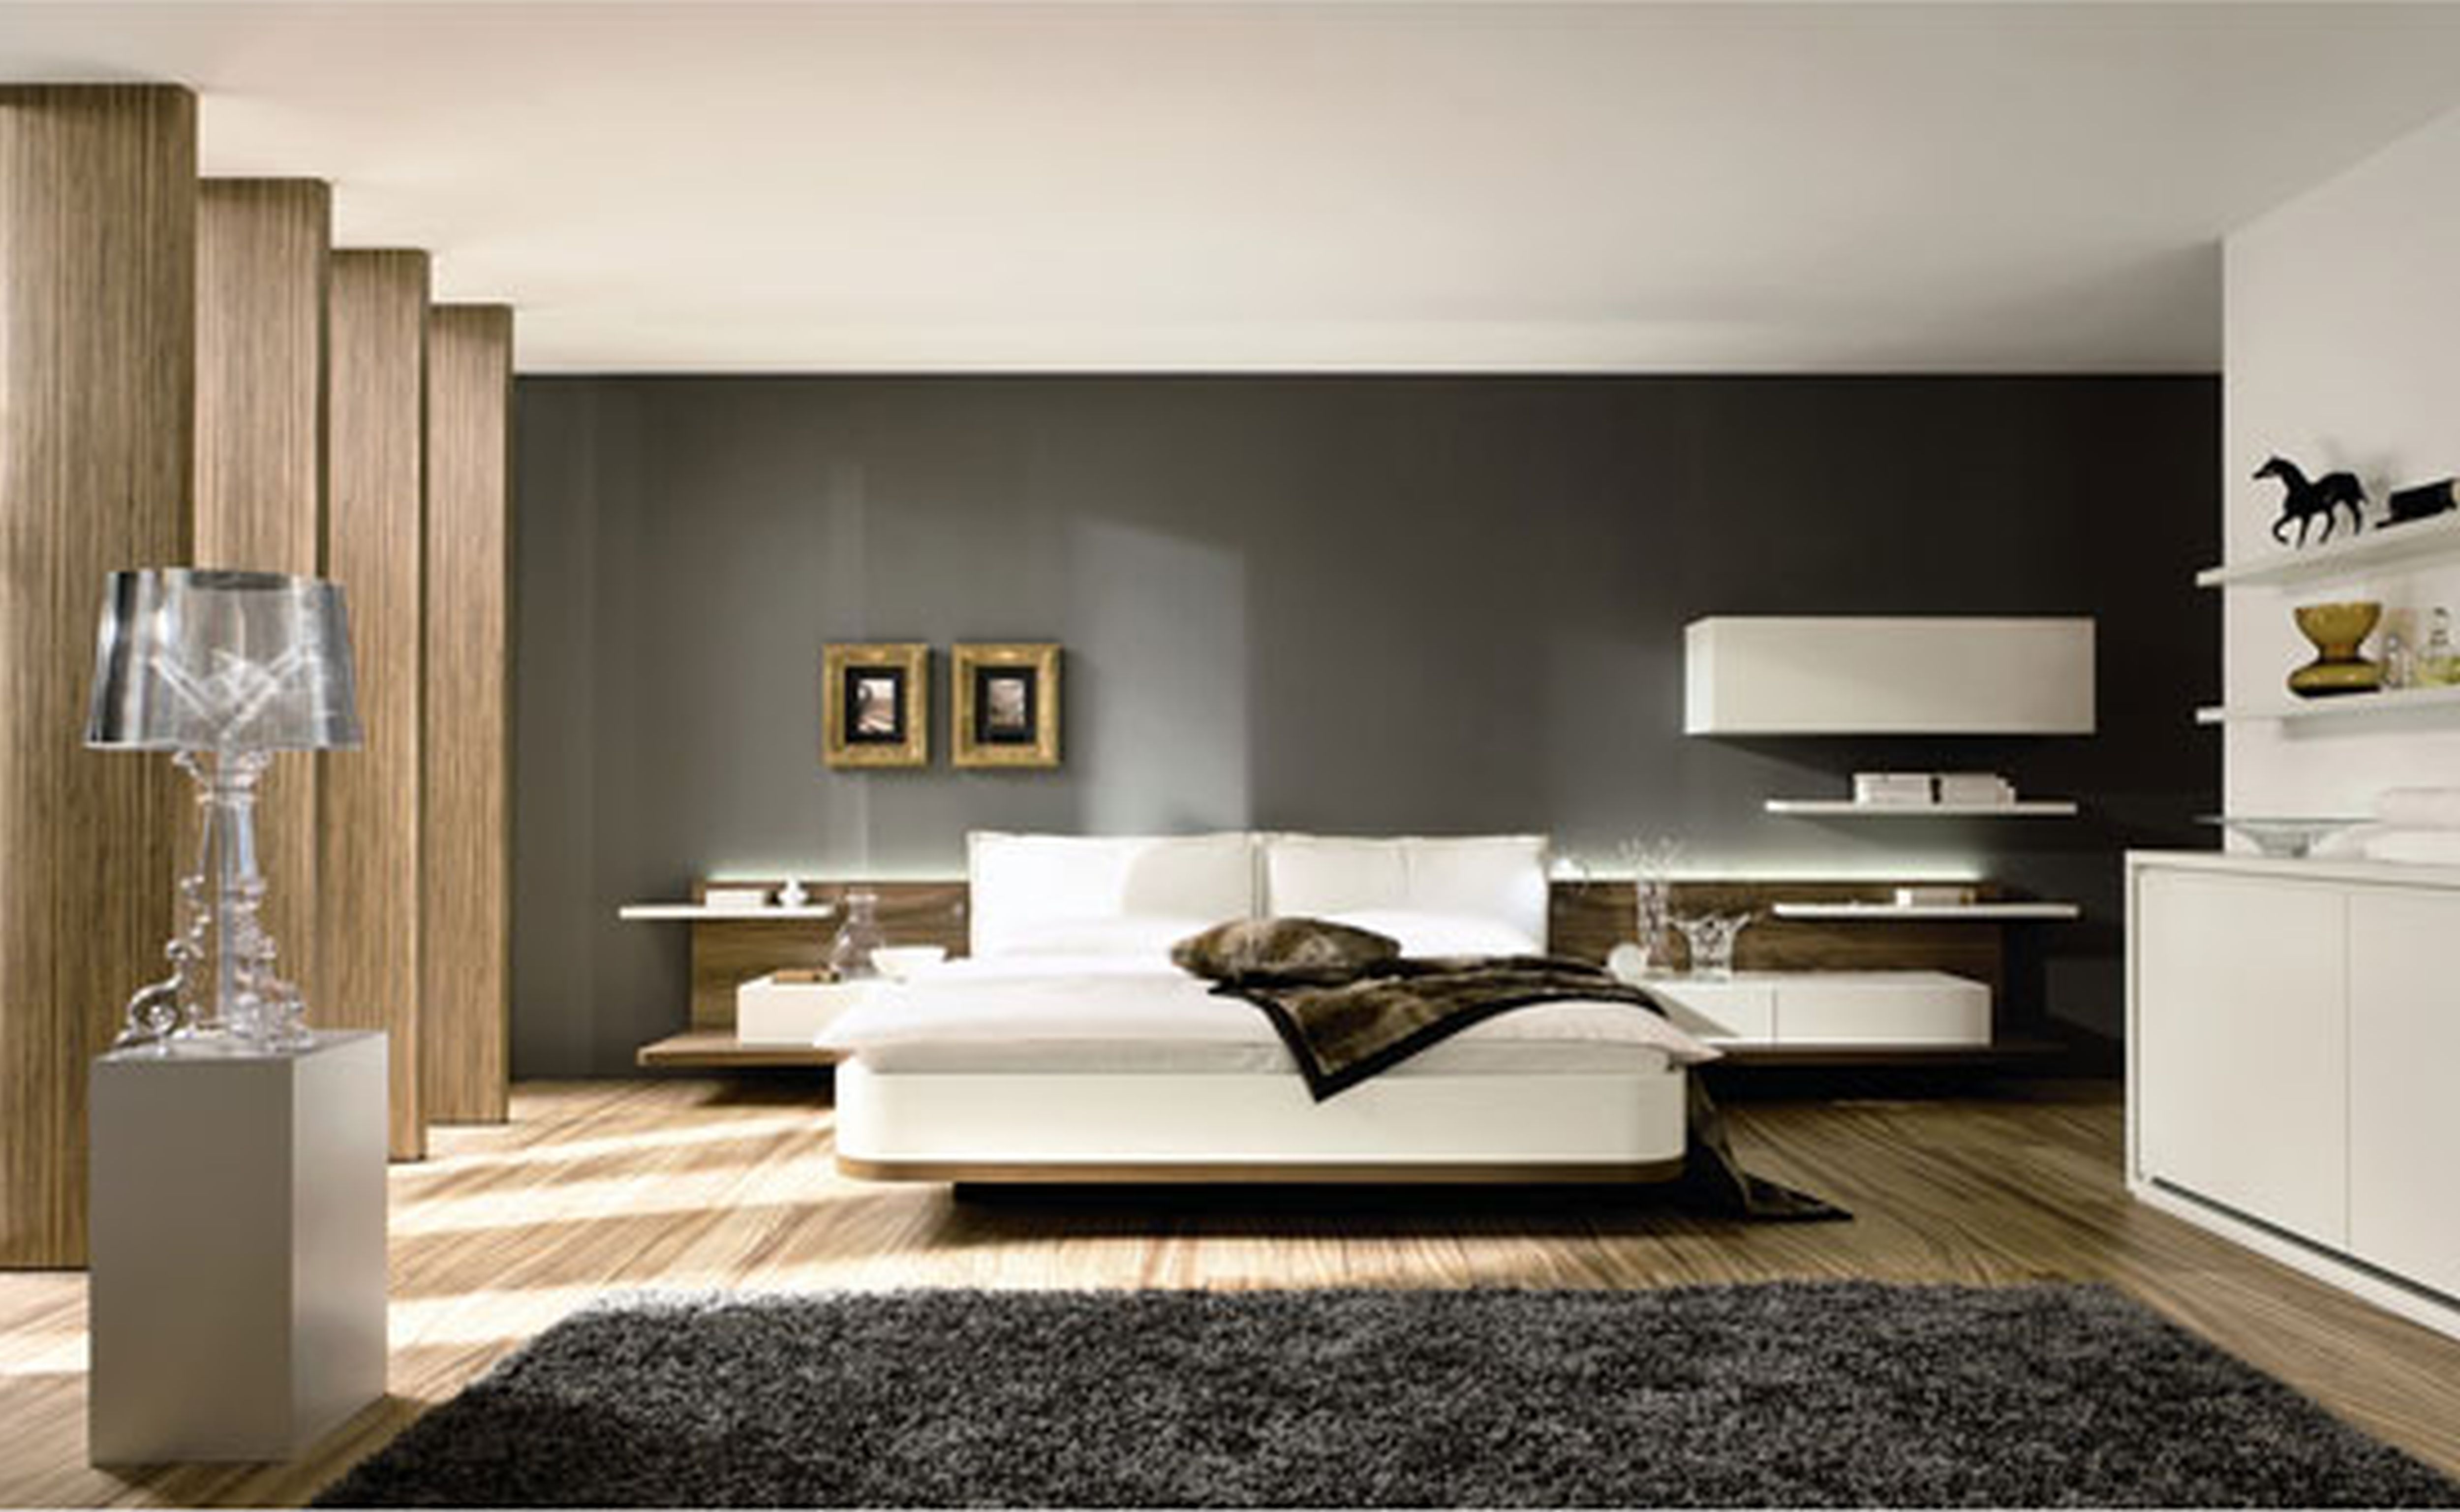 40 Modern Bedroom For Your Home   The WoW Style